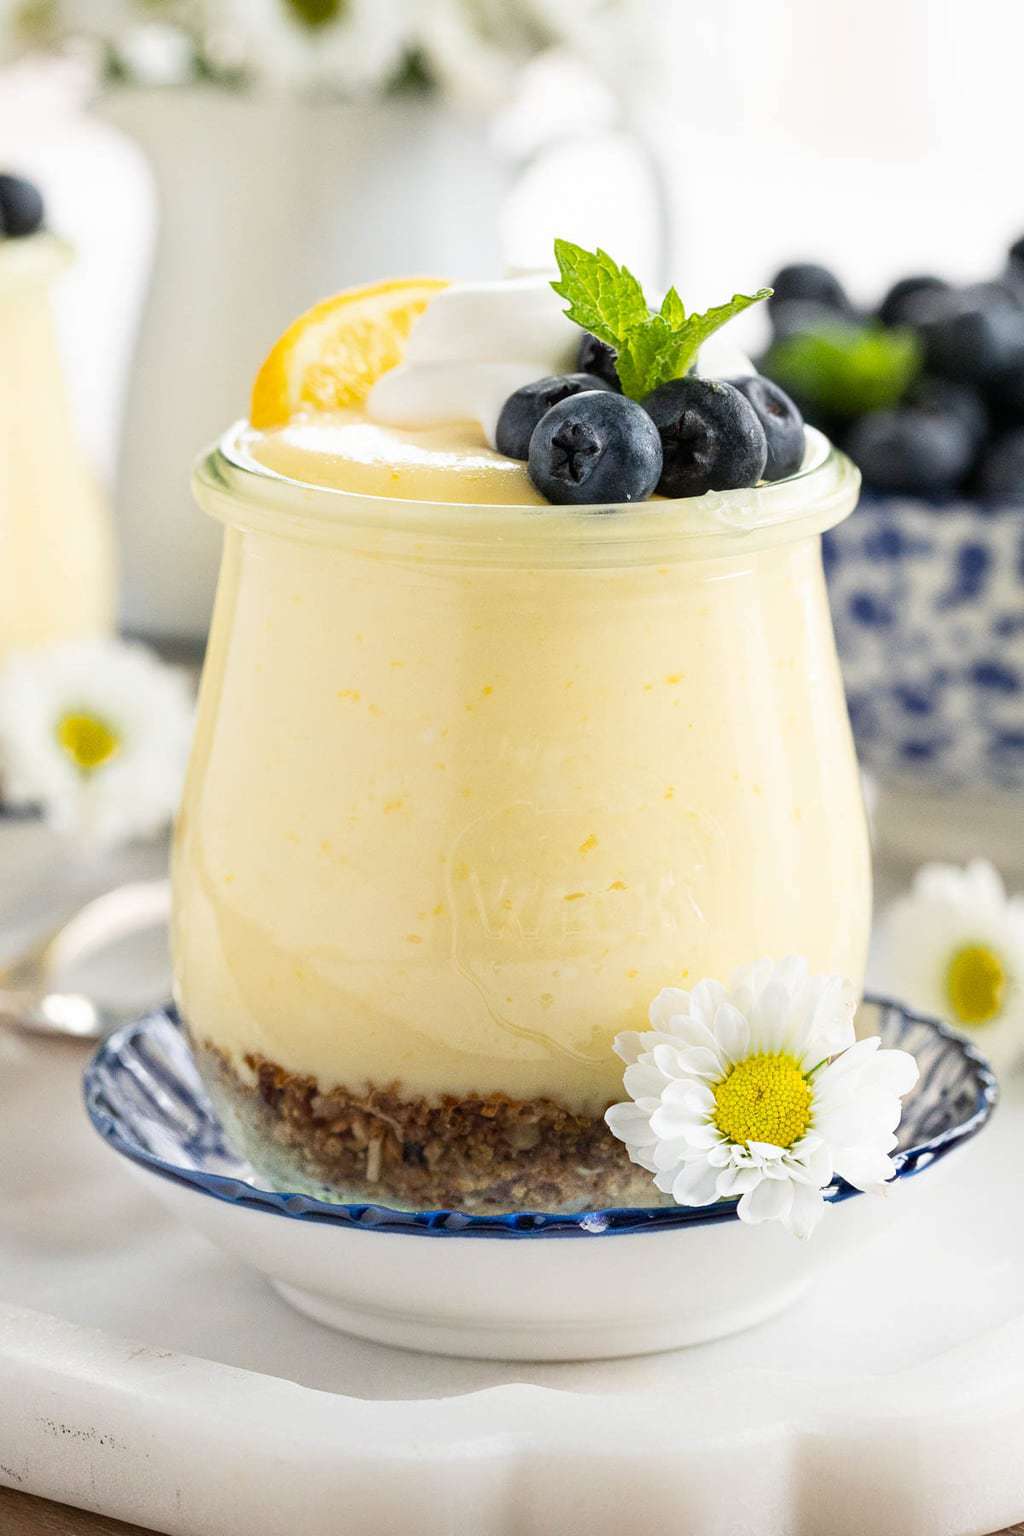 Vertical closeup photo of an Easy Lemon Curd Mouse in a small glass Weck jar garnished with blueberries, lemon slices and flowers.